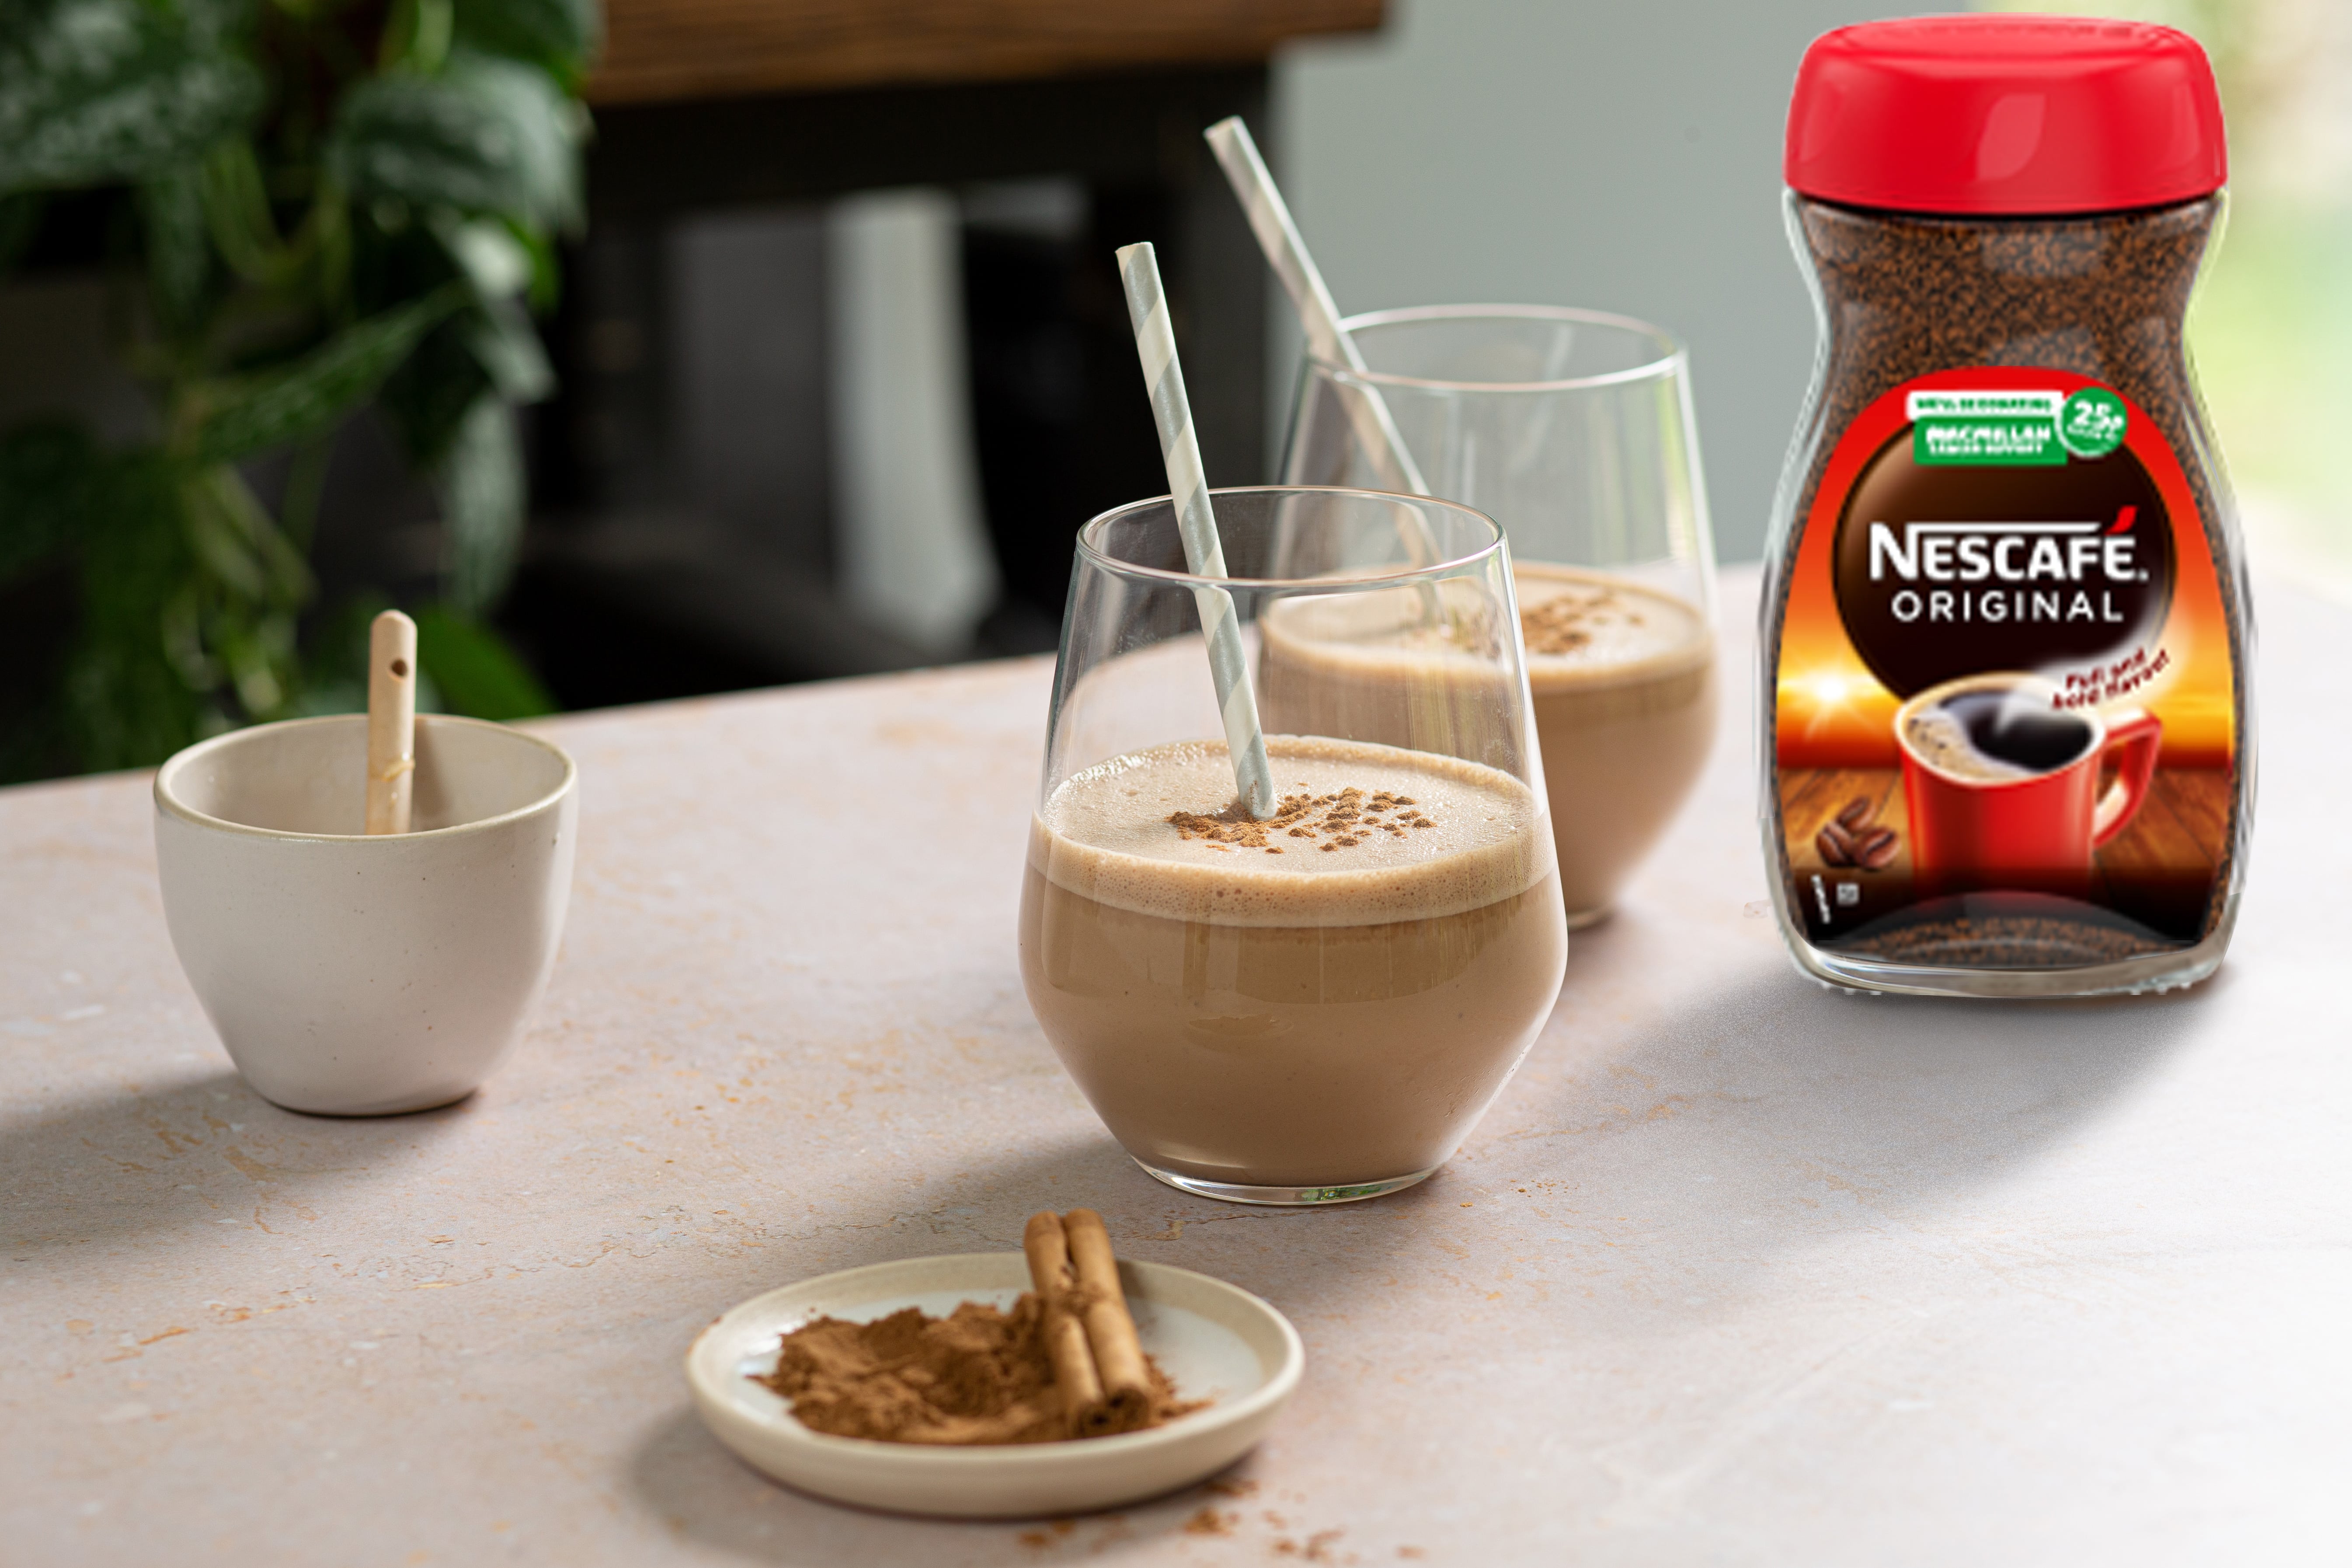 Two glasses of coffee smoothie with a straw. Nescafe original jar is next to the smoothies.